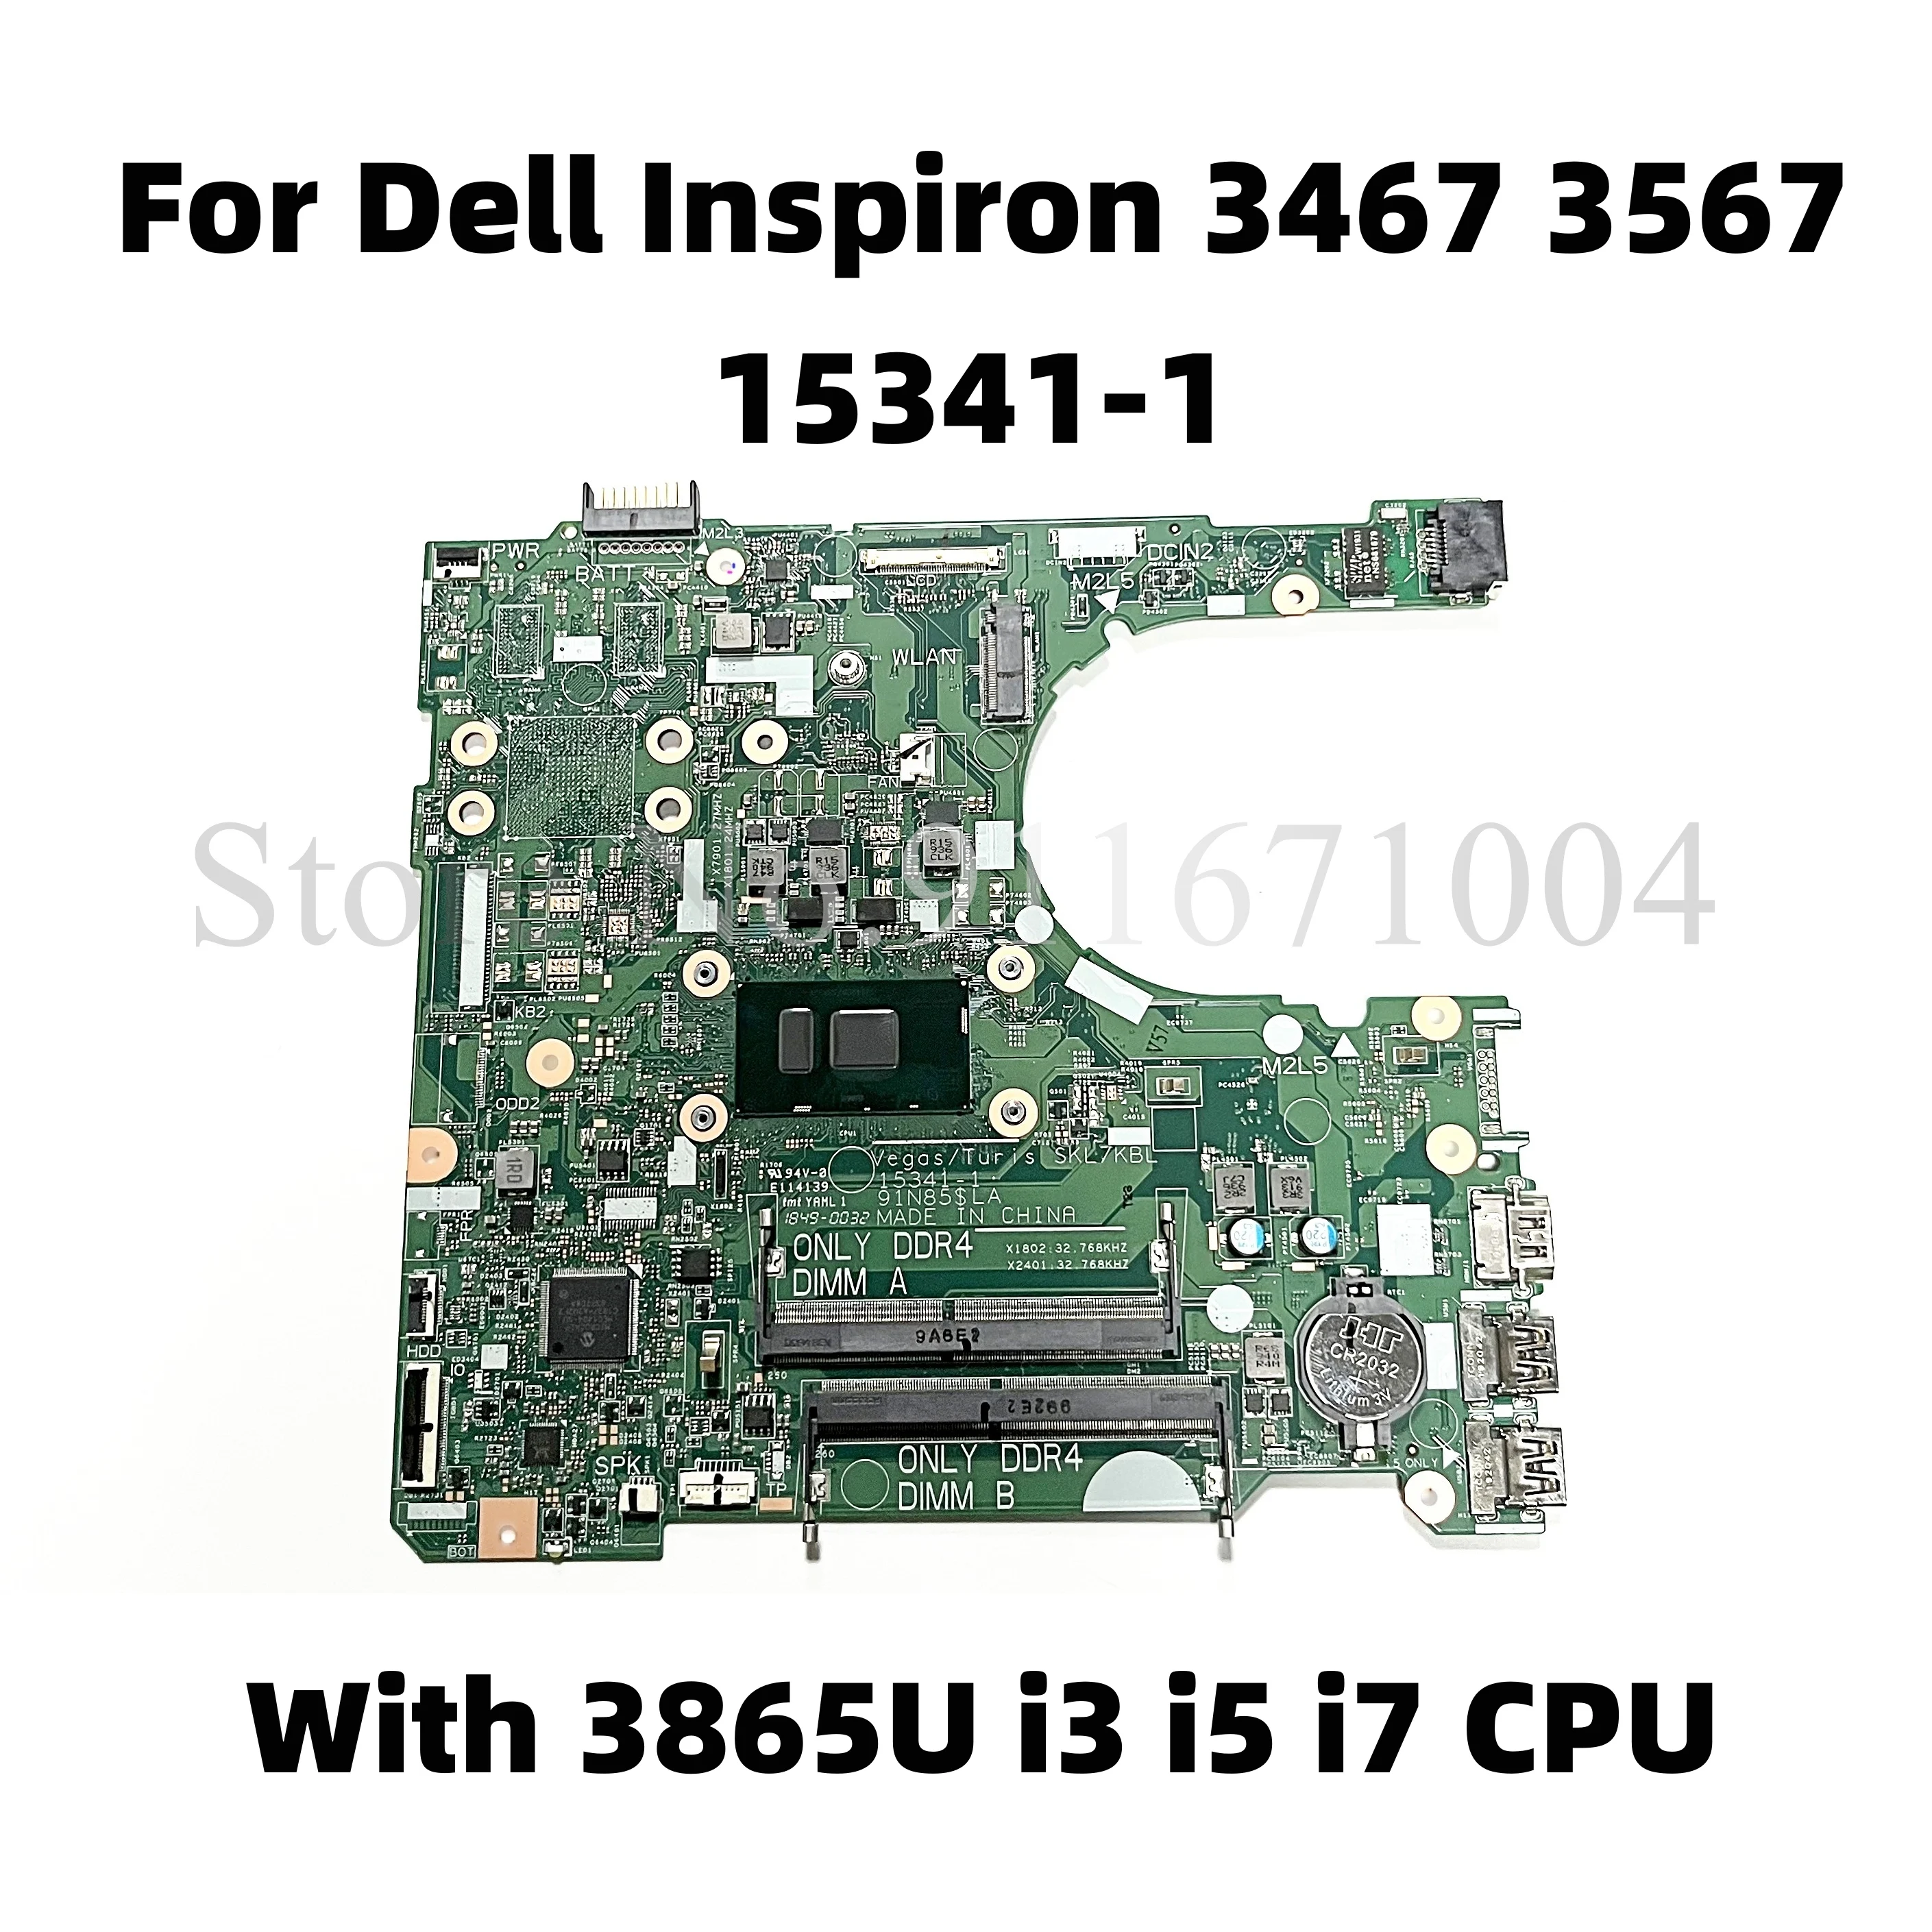 

CN-0NP4RY 0NP4RY NP4RY For dell Inspiron 3467 3567 Laptop Motherboard 15341-1 91N85 With 3865U i3 i5 i7 CPU 100% Tested Working